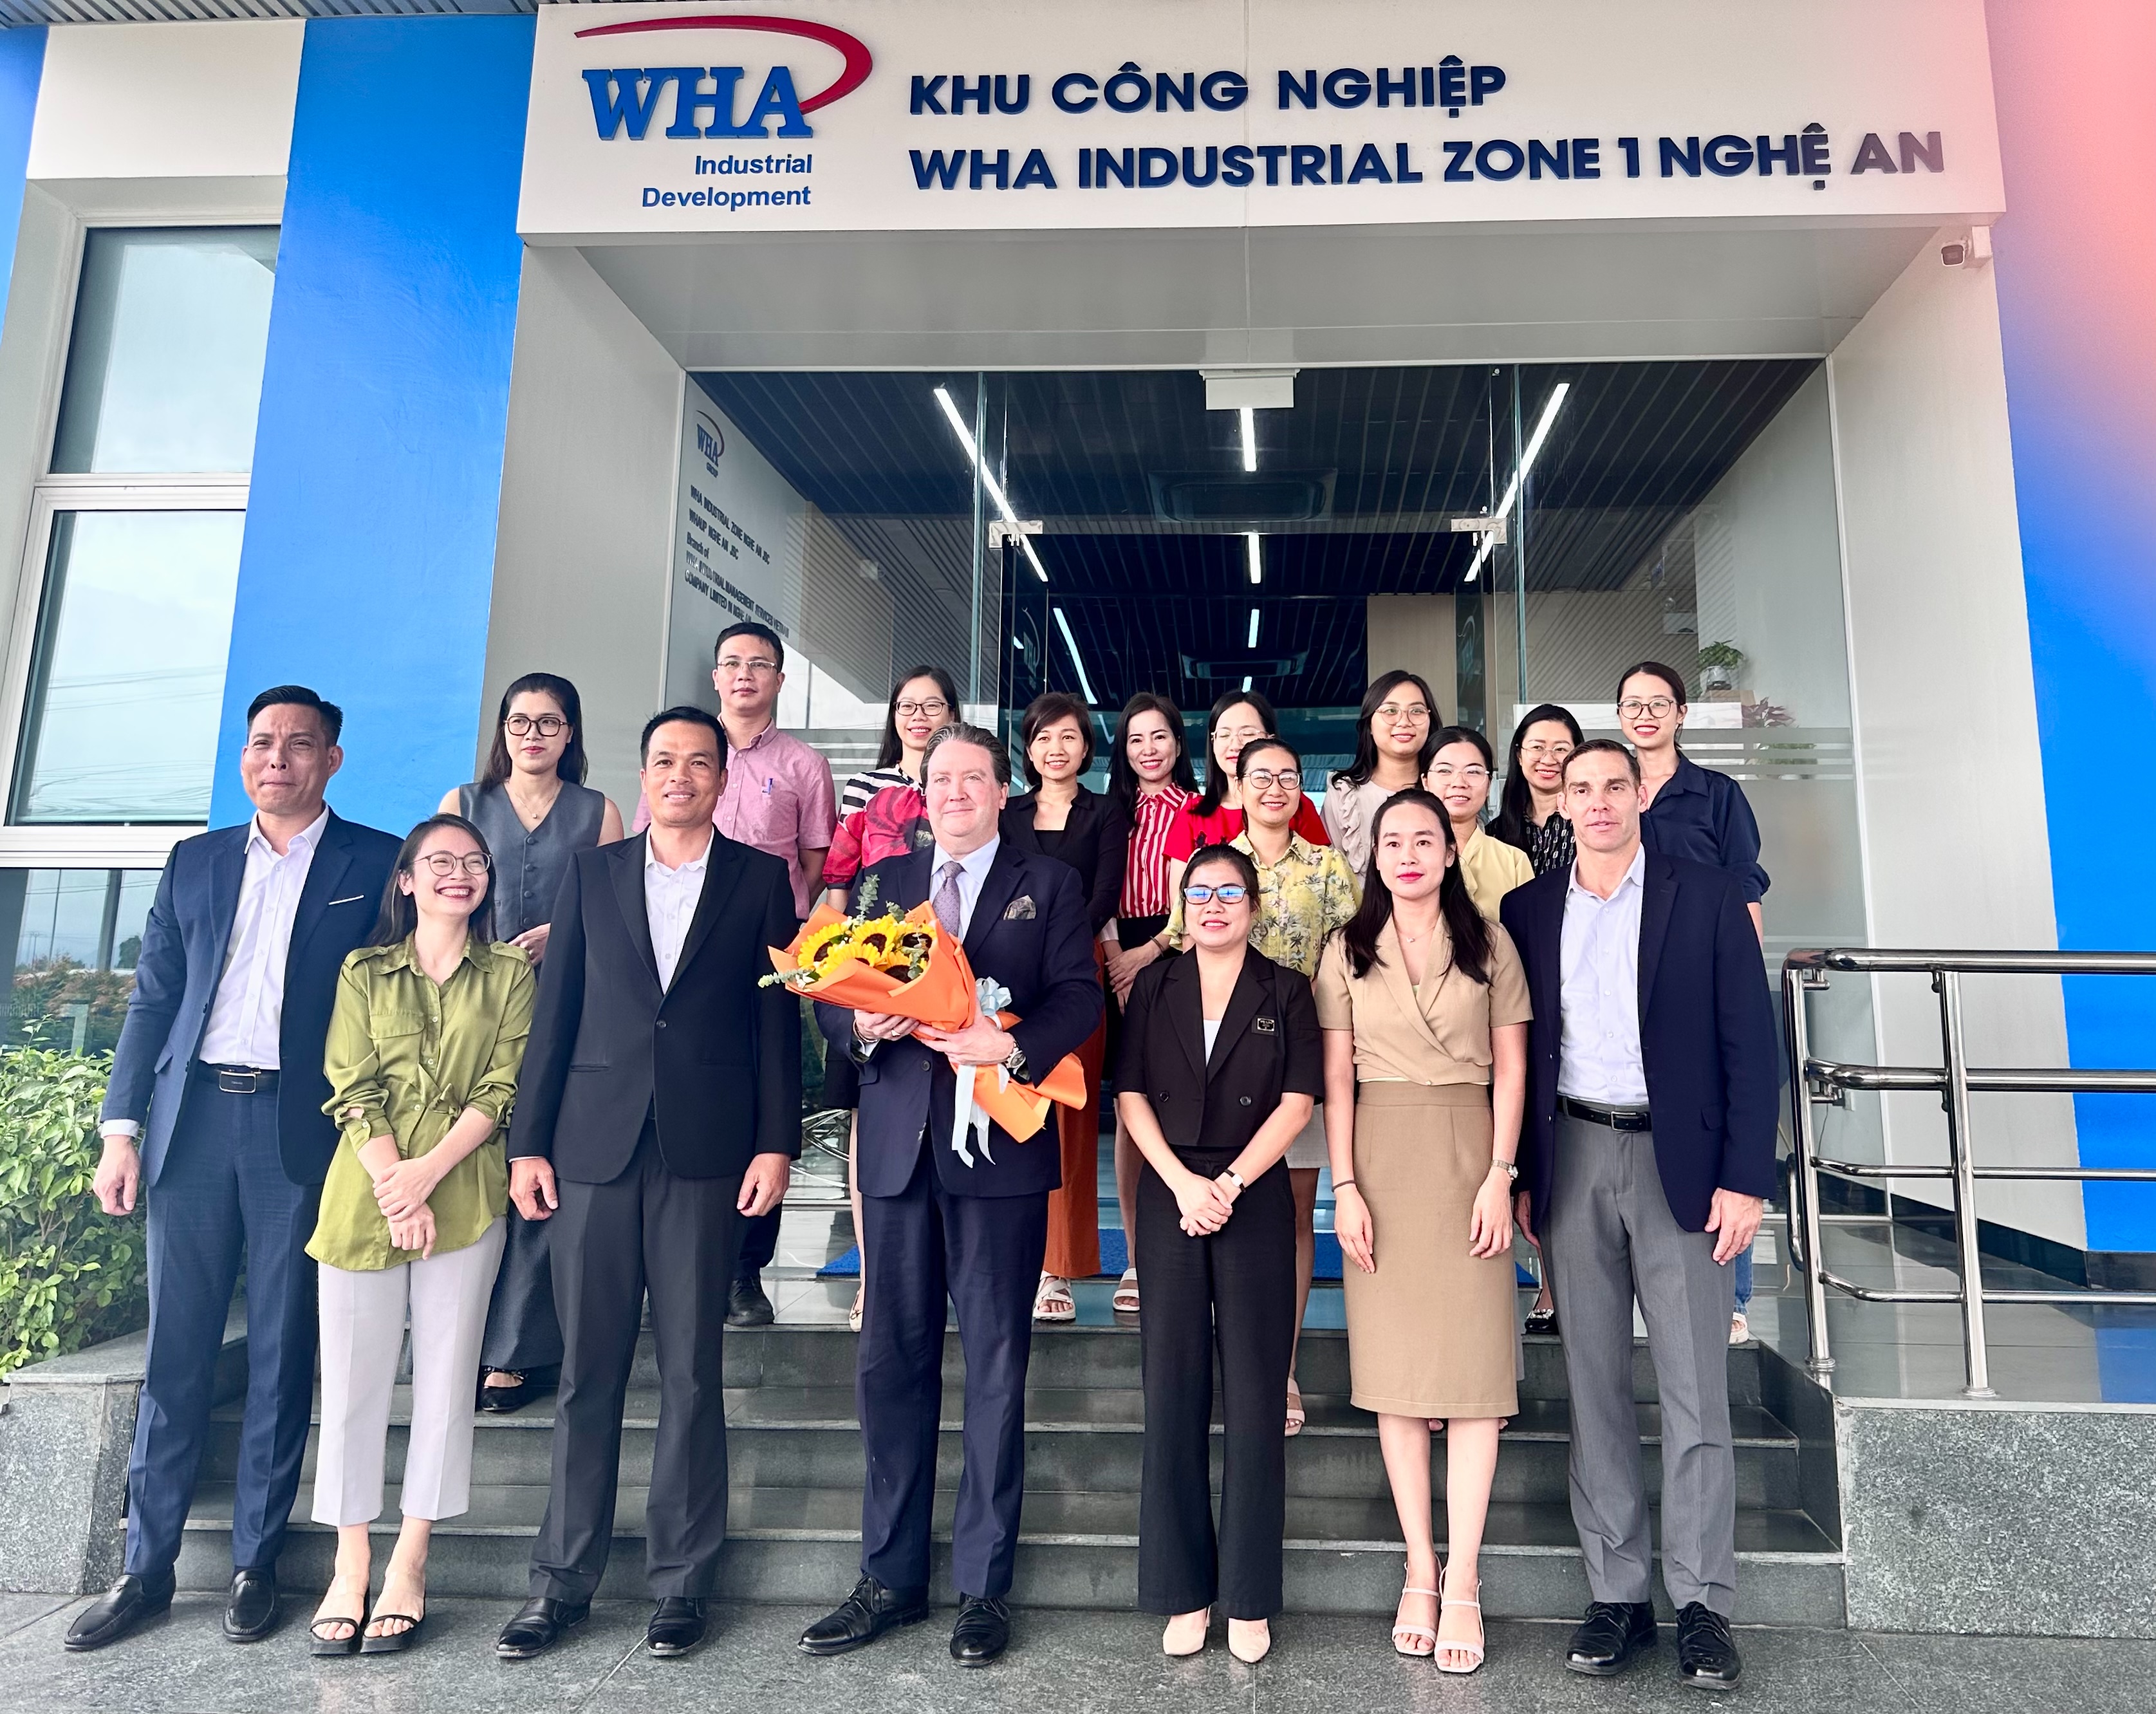 US Ambassador visits WHA Industrial Zone 1 – Nghe An